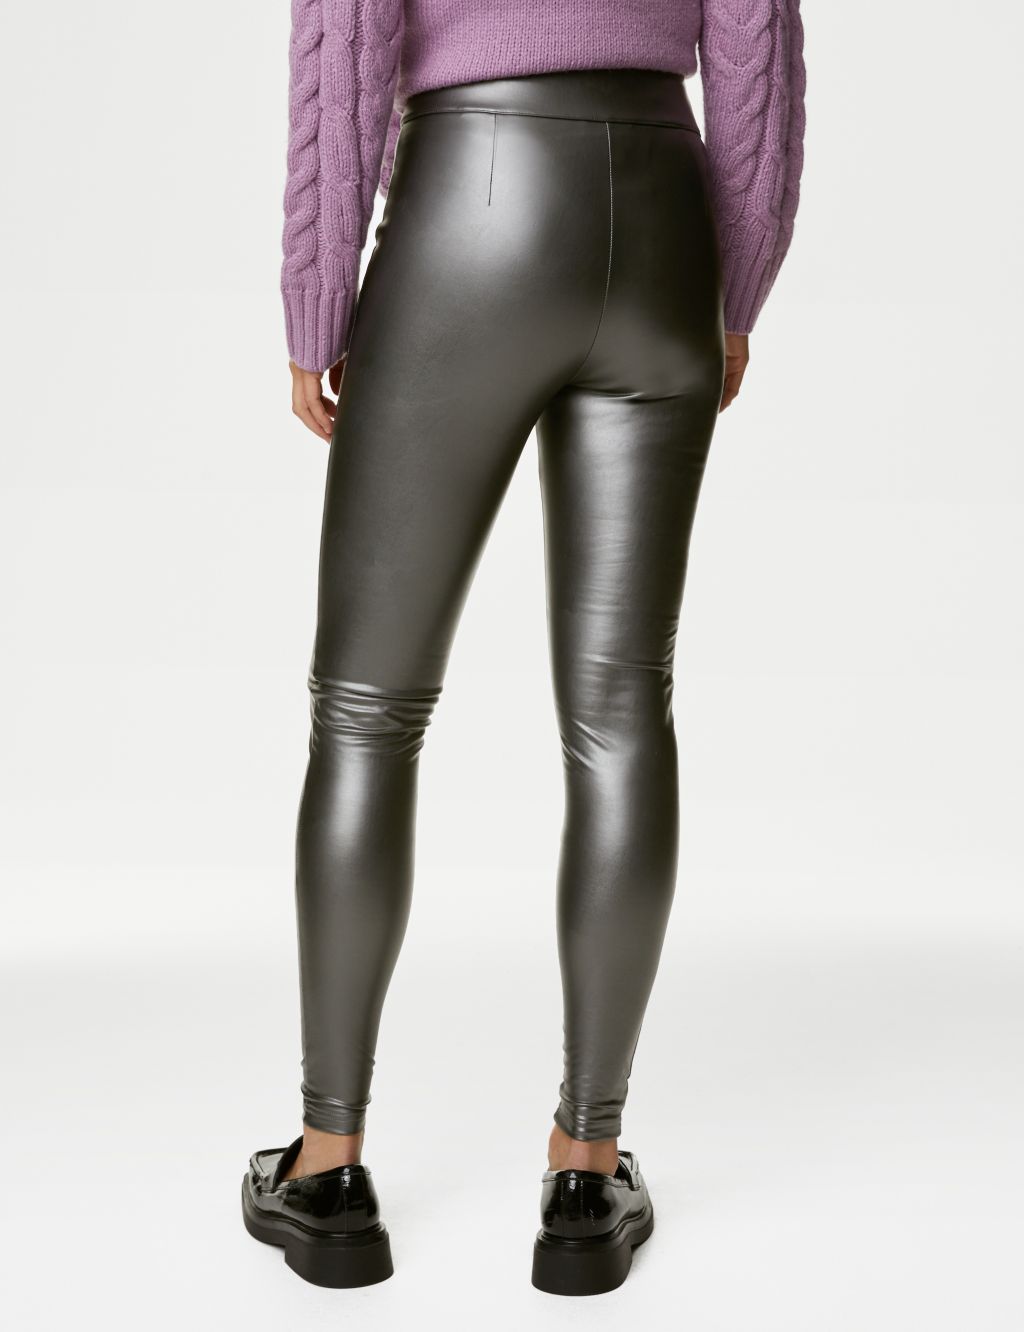 Leather Look High Waisted Leggings image 5